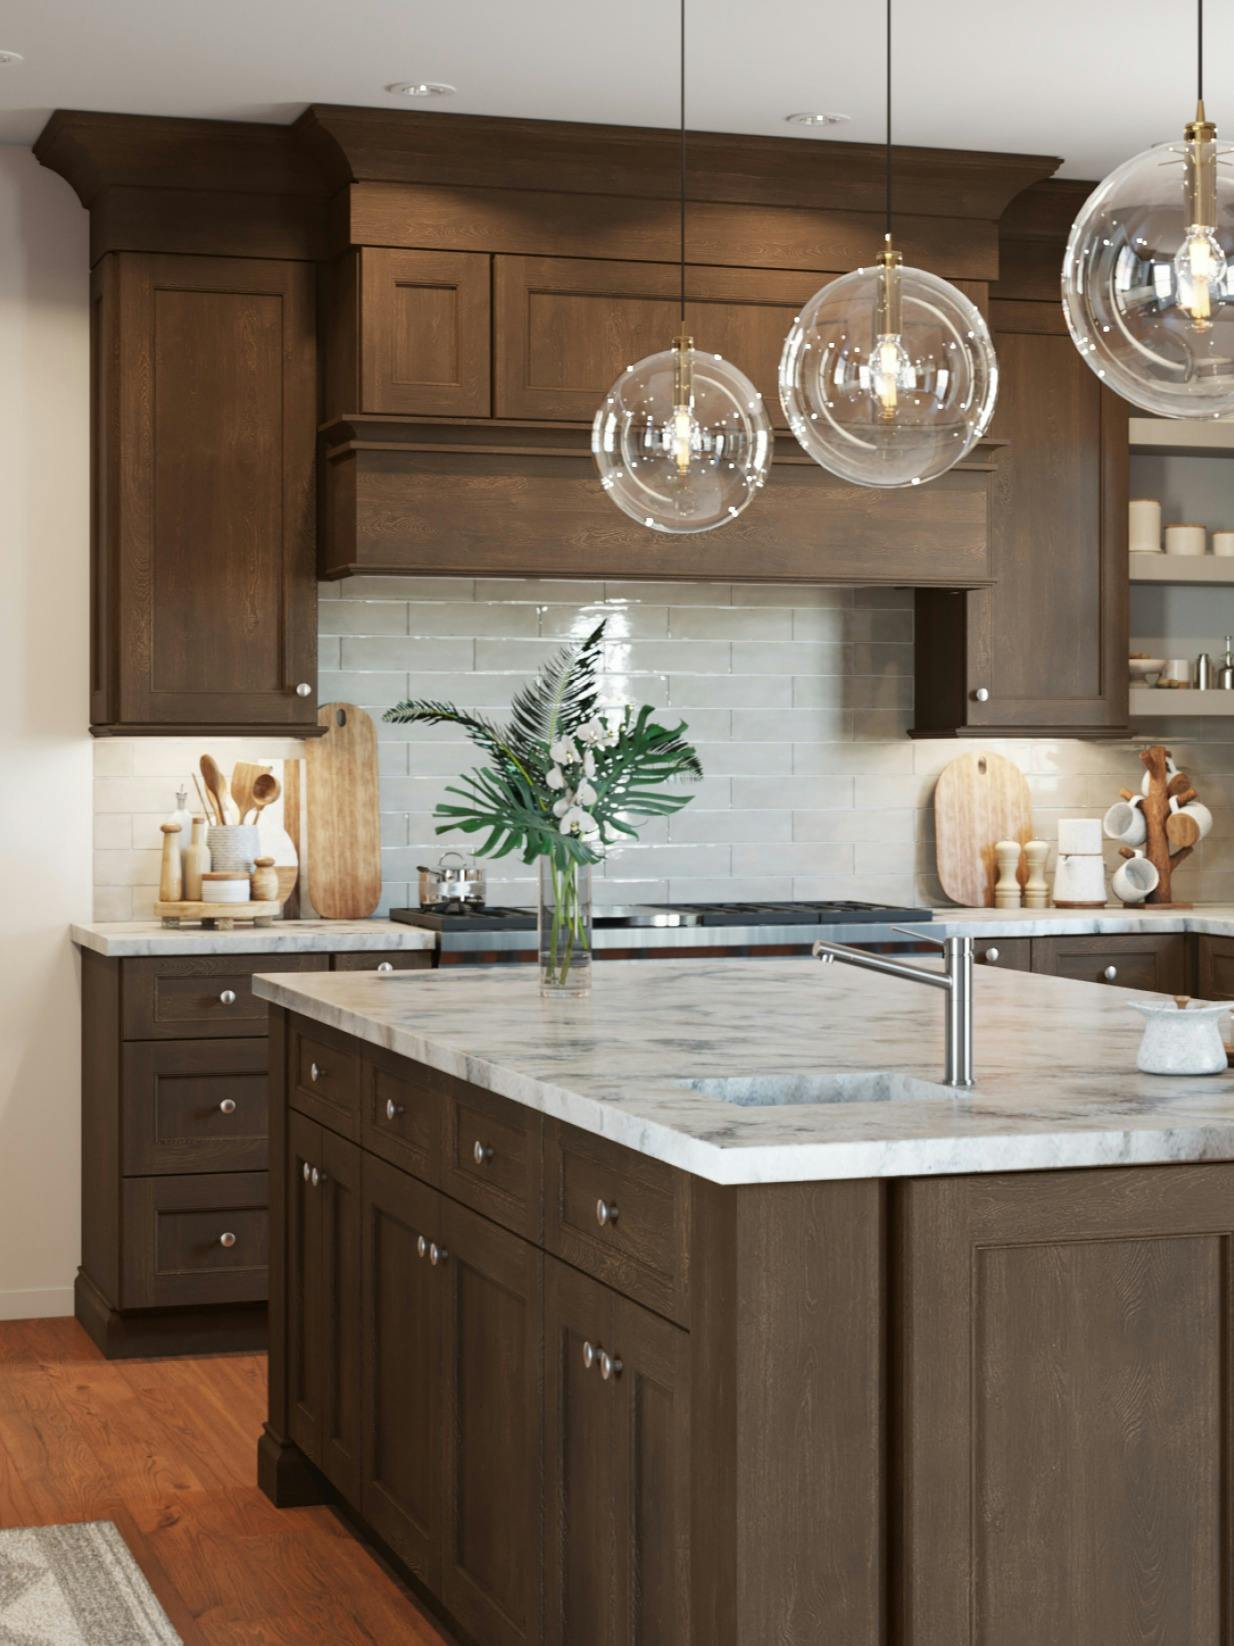 Kitchen Cabinet Maker Fabuwood Cabinetry